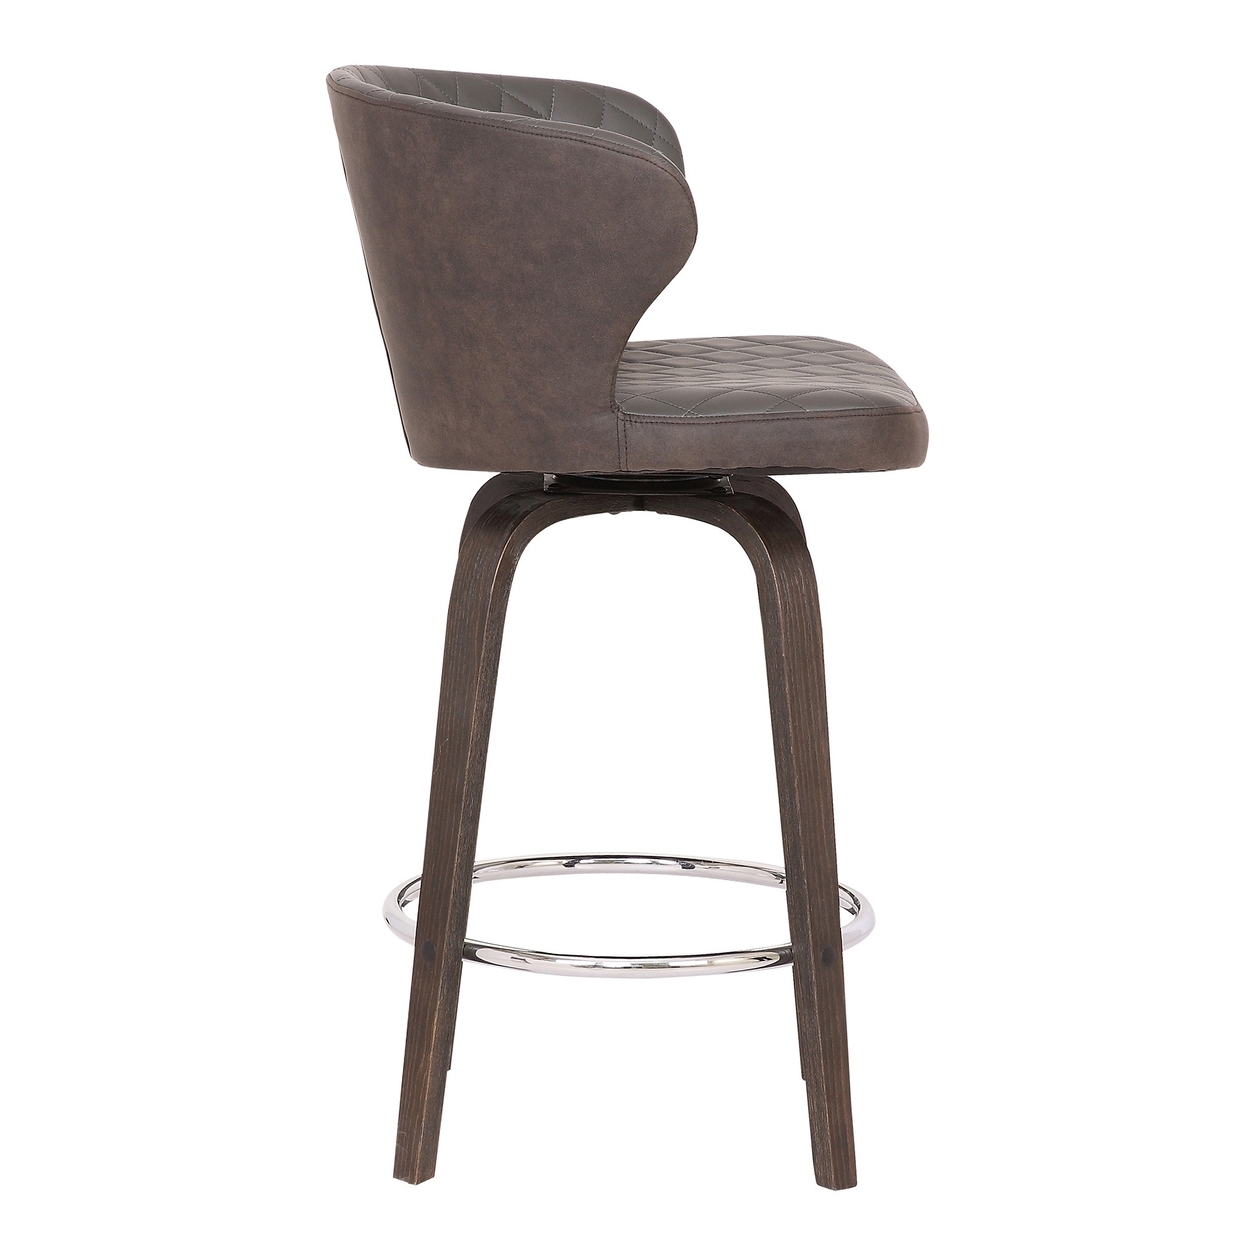 Leatherette Curved Back Swivel Barstool With Angled Legs, Brown- Saltoro Sherpi